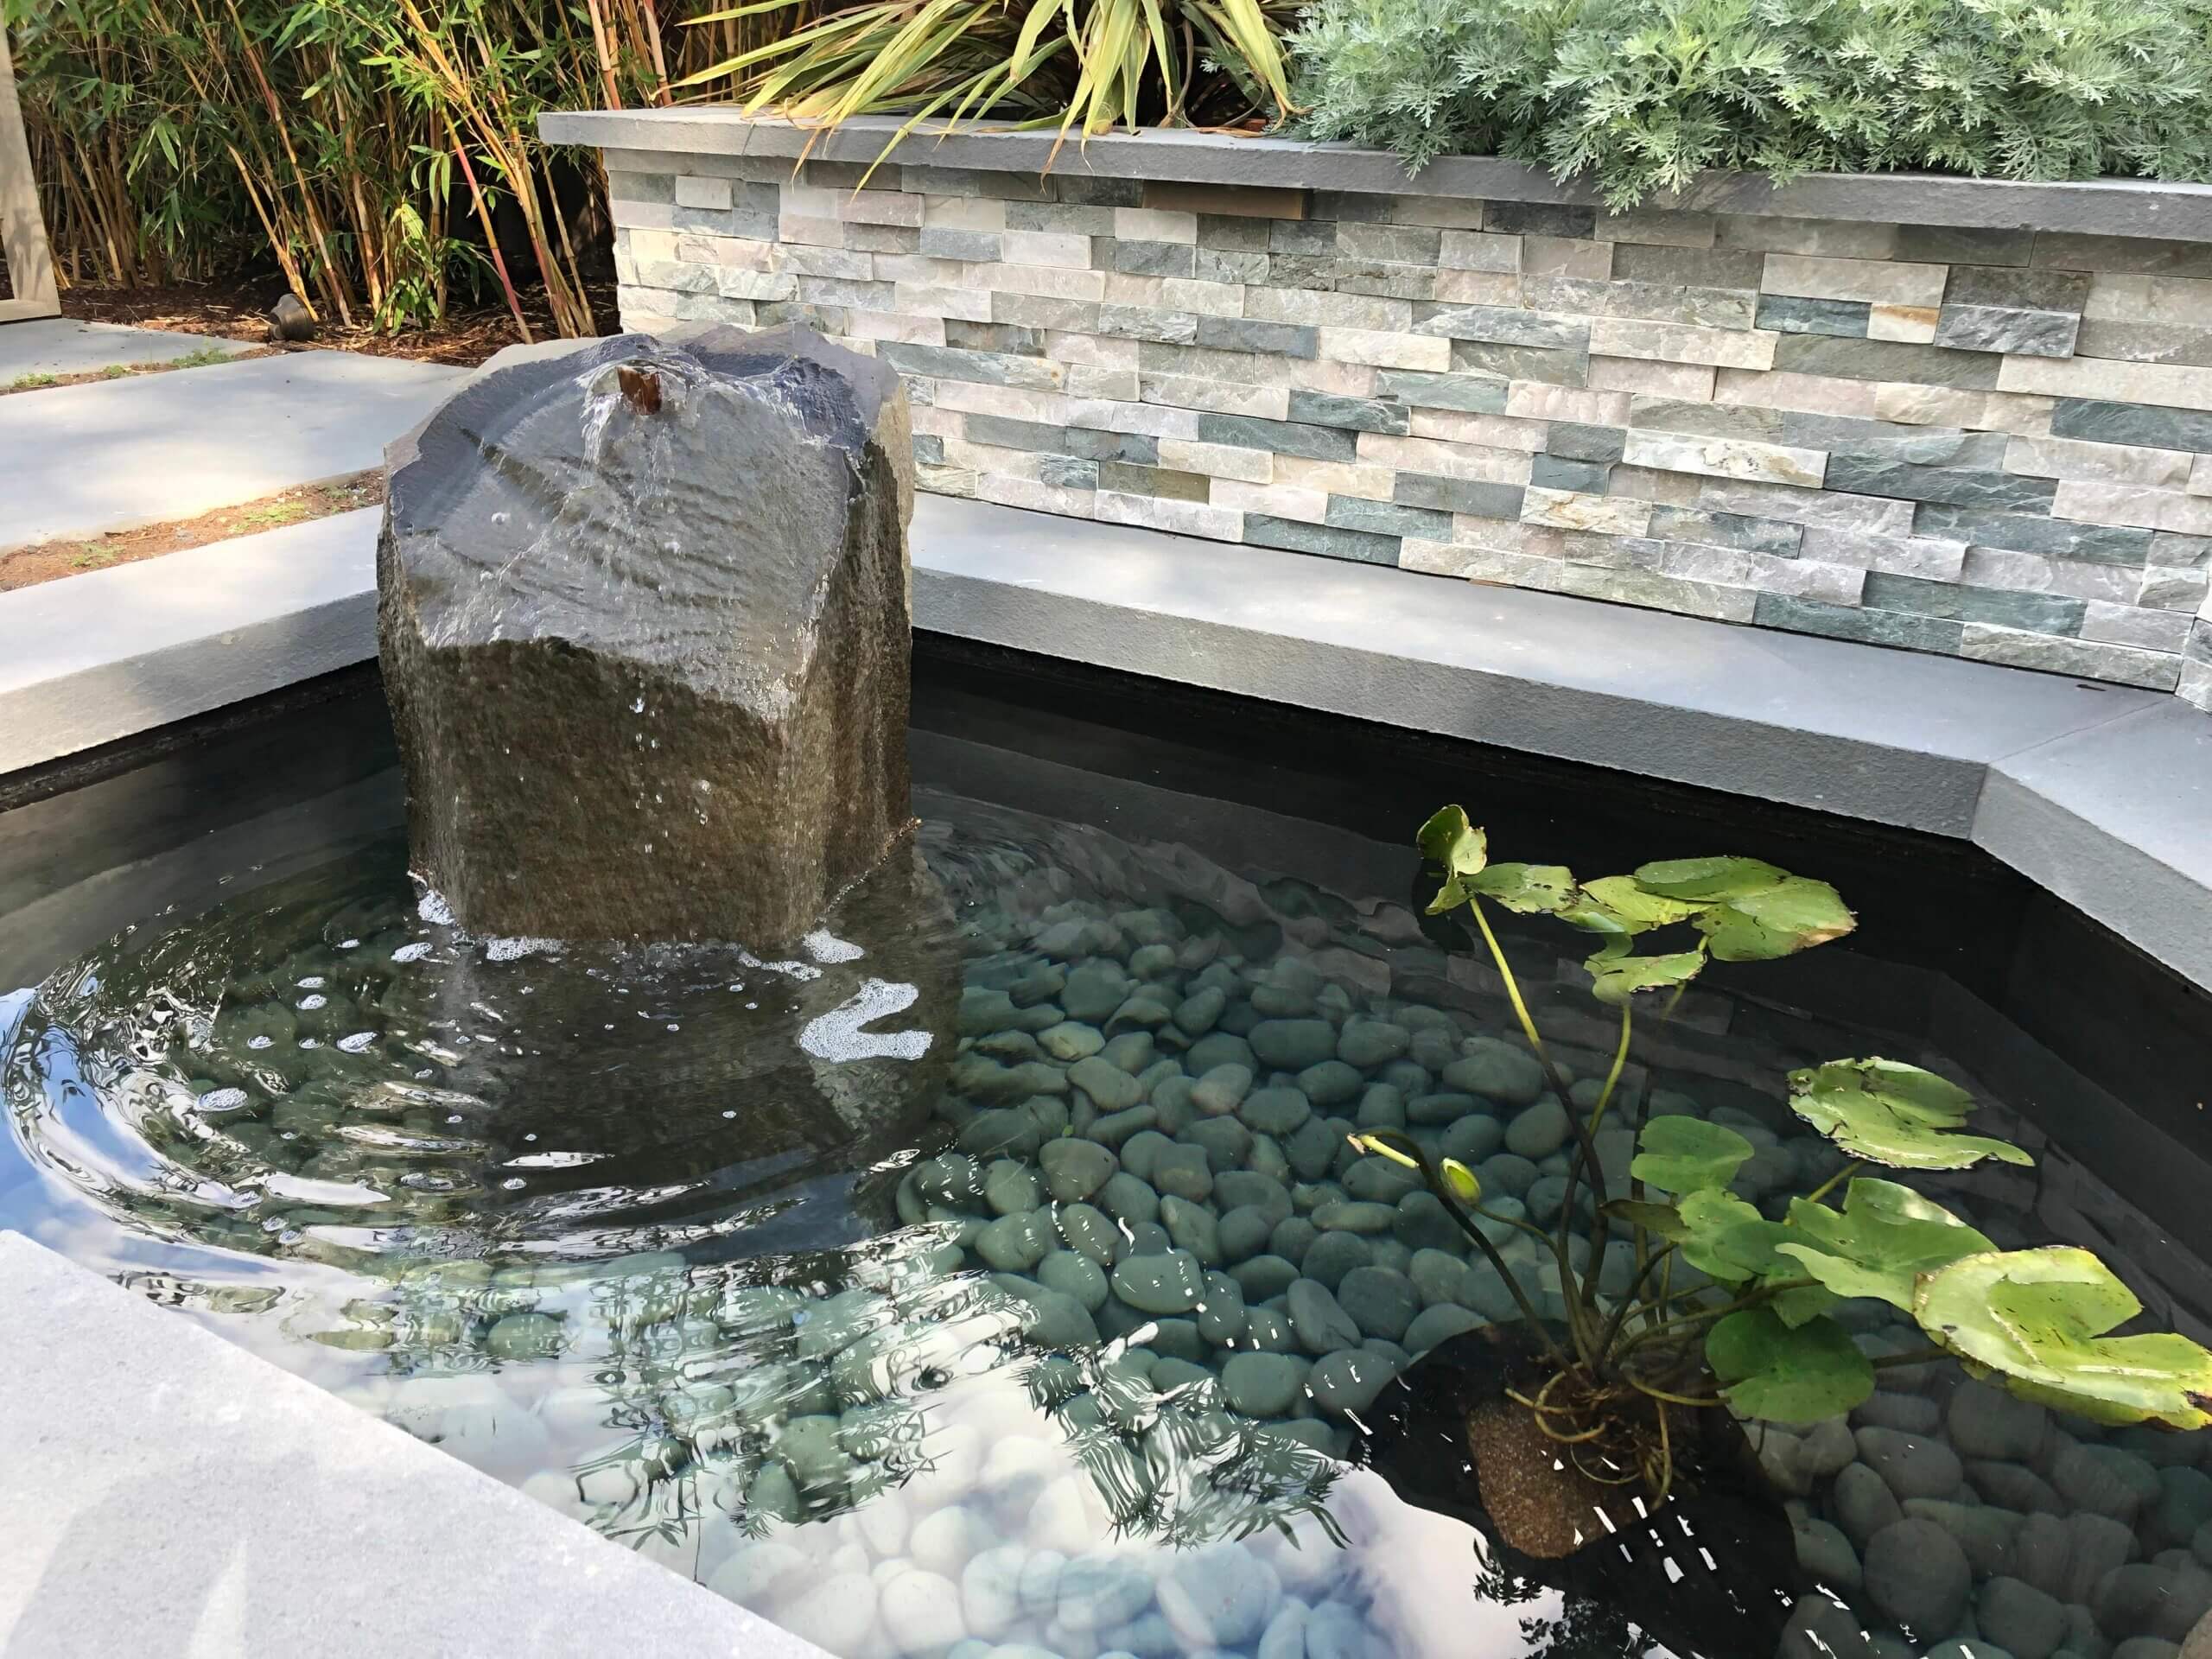 Koi pond with natural stone fountain feature, water plants, and sheltered by stacked stone wall